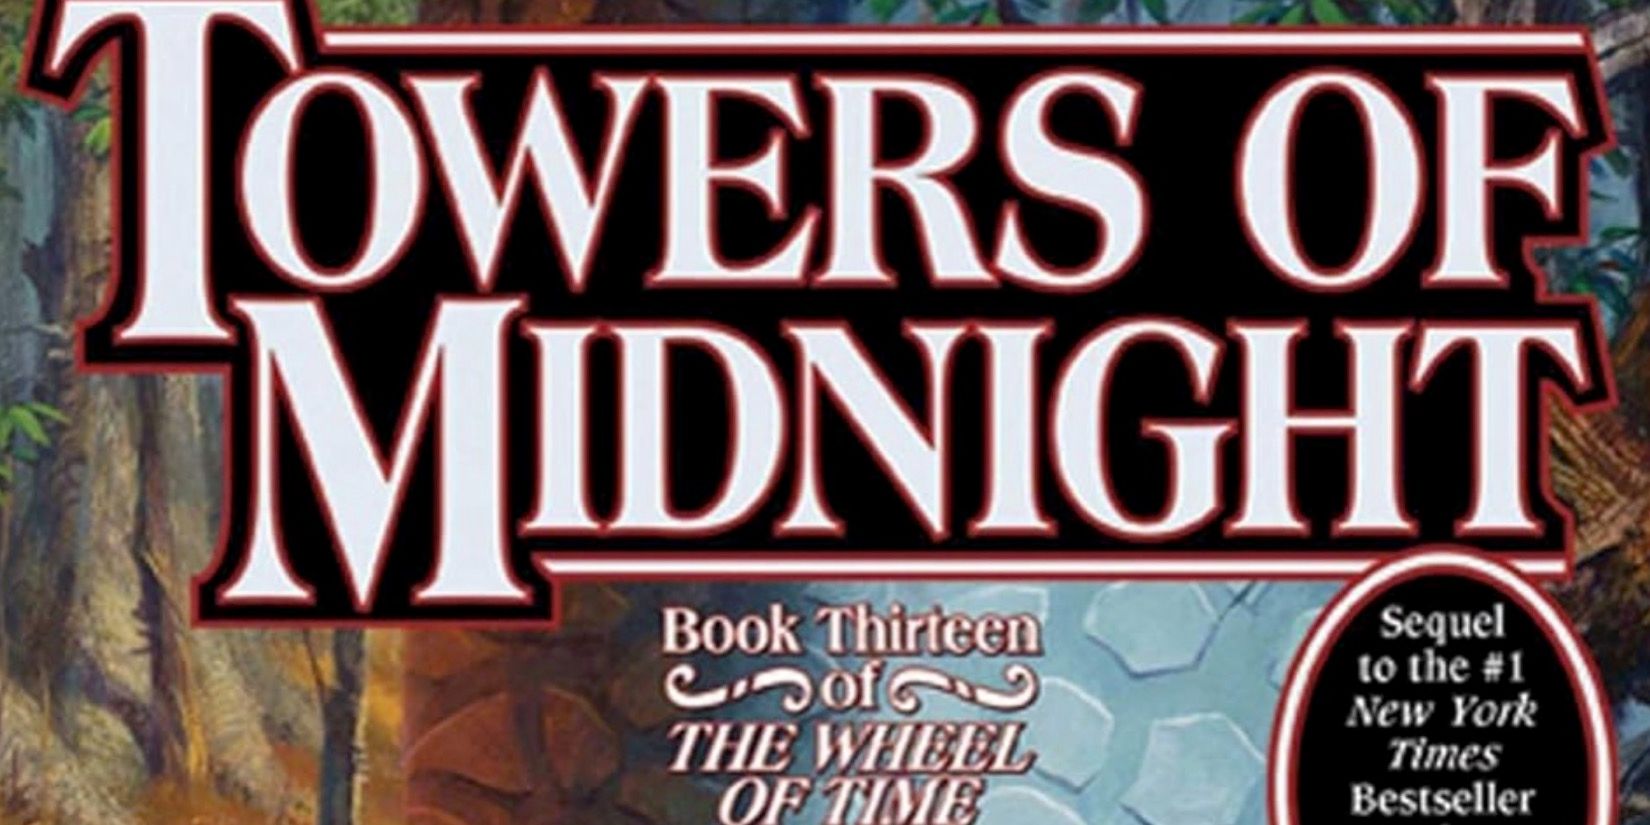 The cover Towers of Midnight by Robert Jordan.